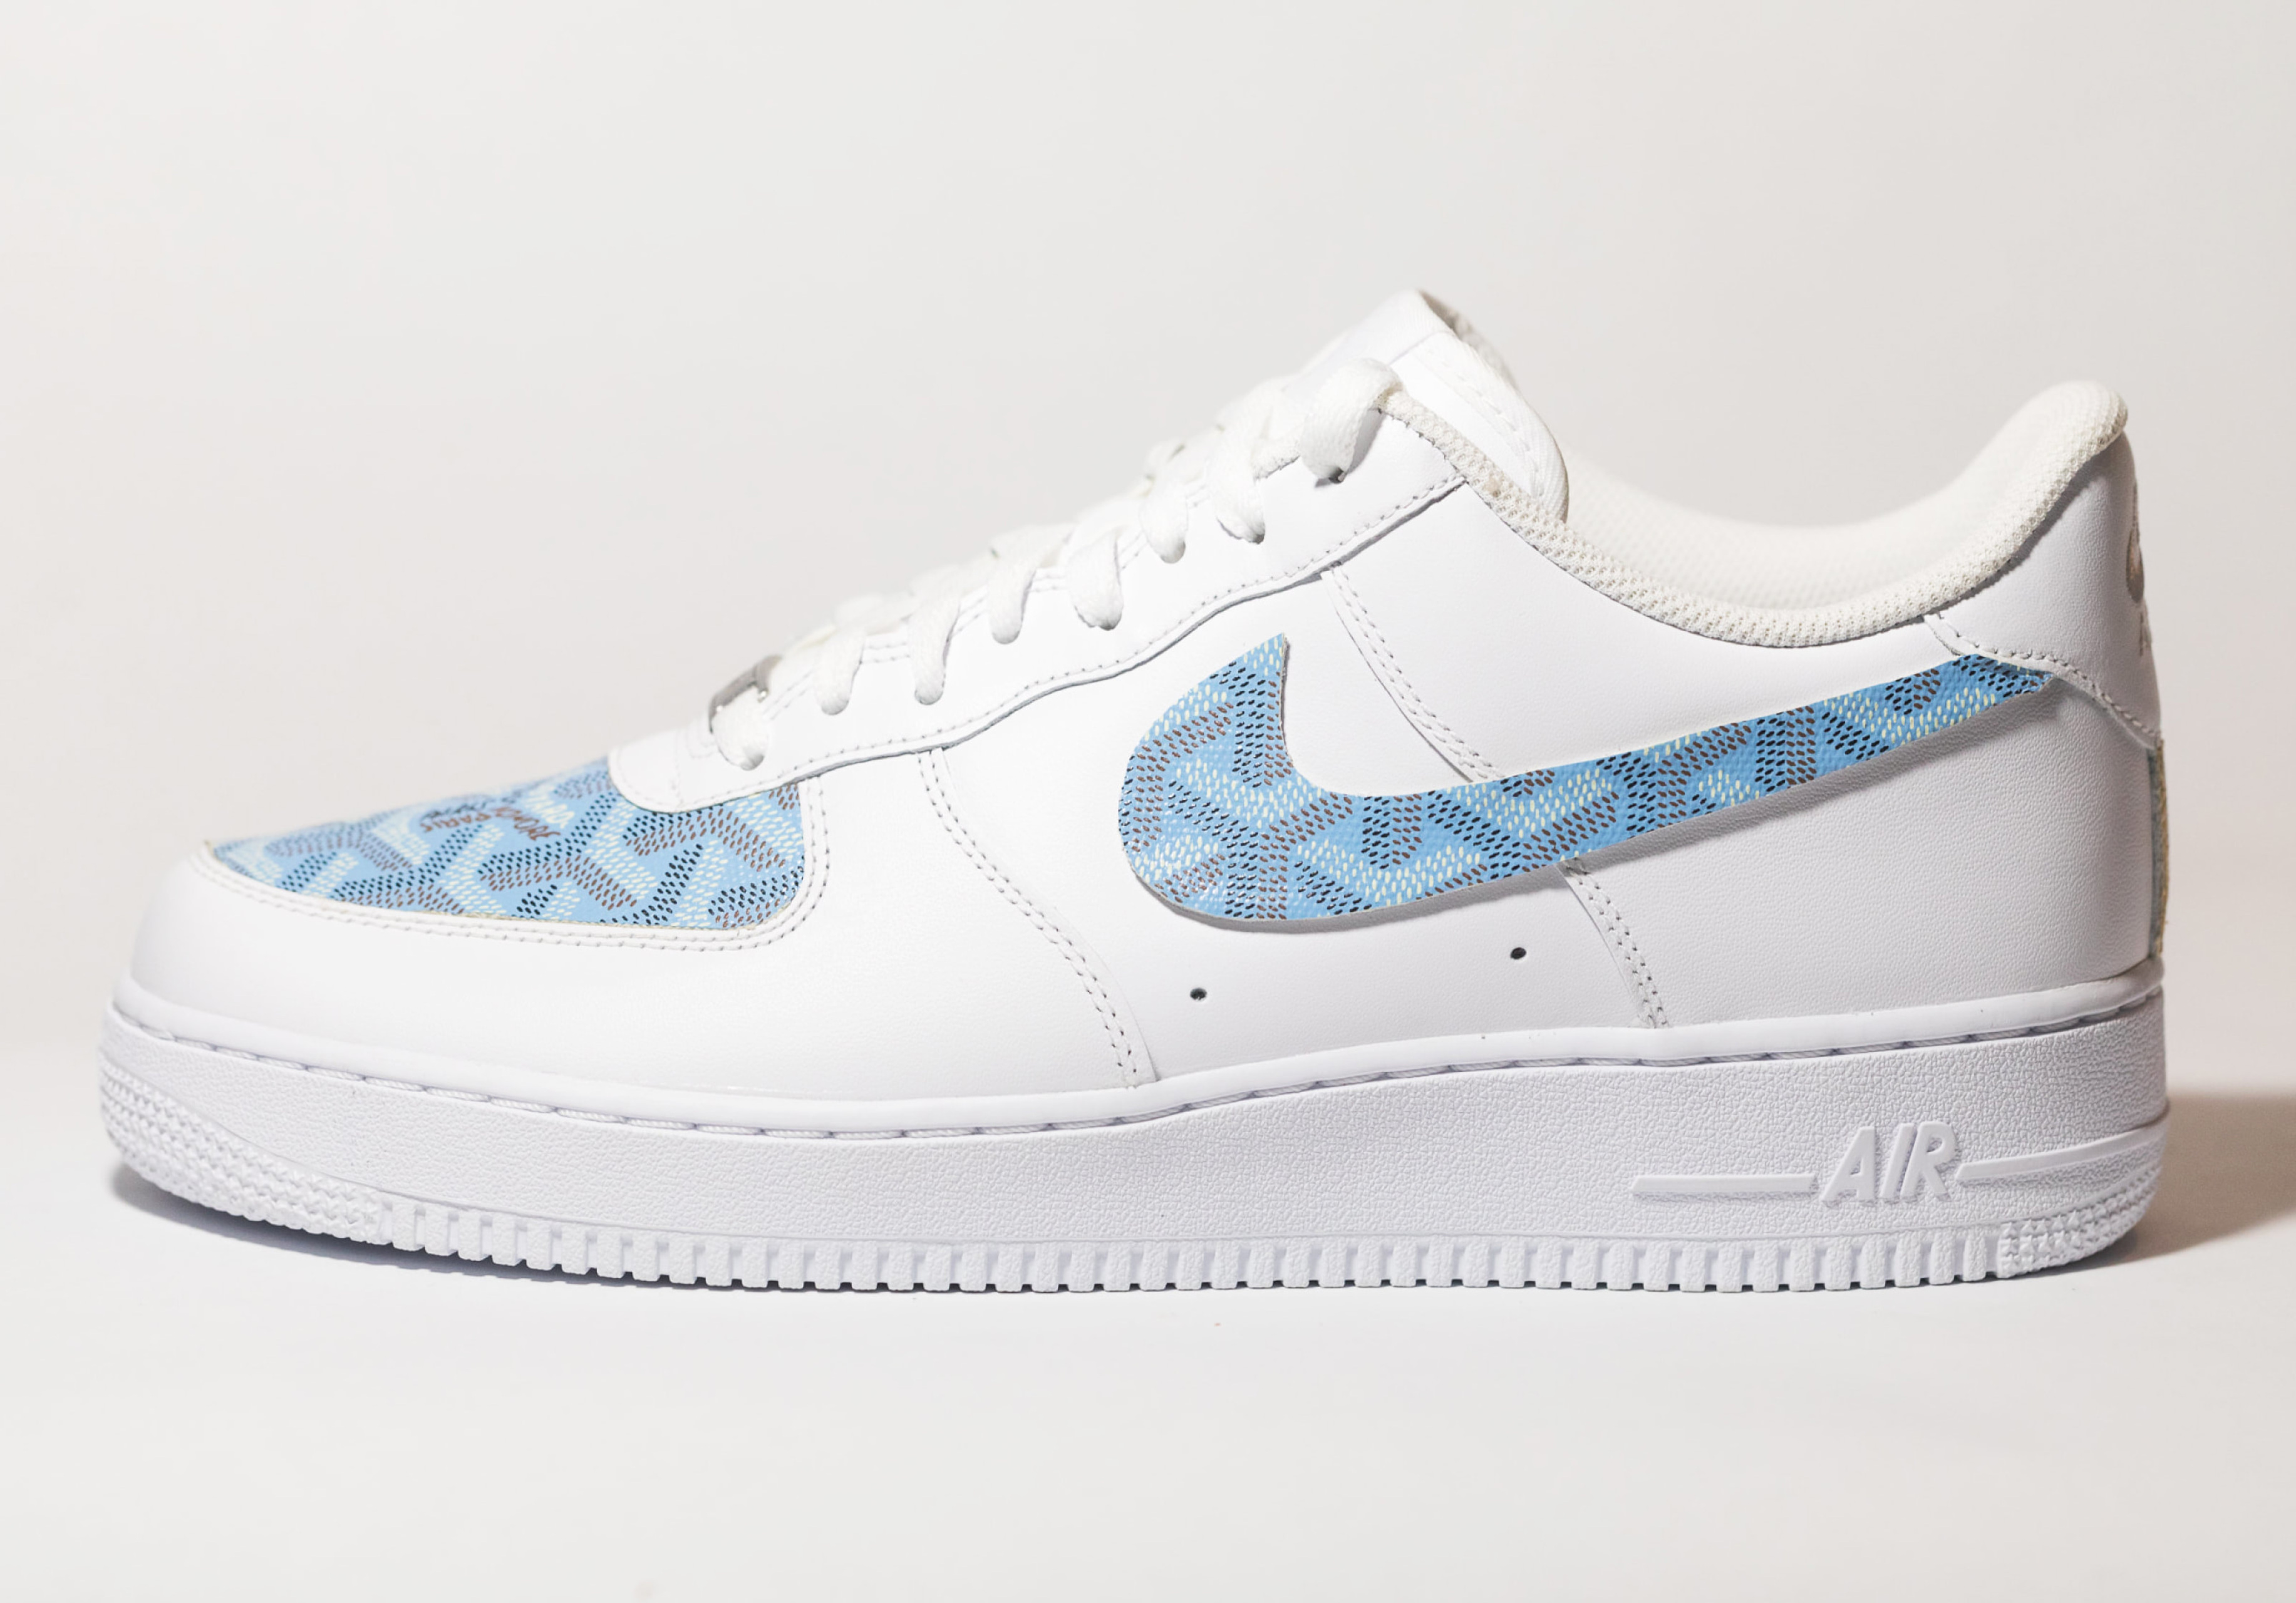 Nike Air Force 1 all white low 'Baby 